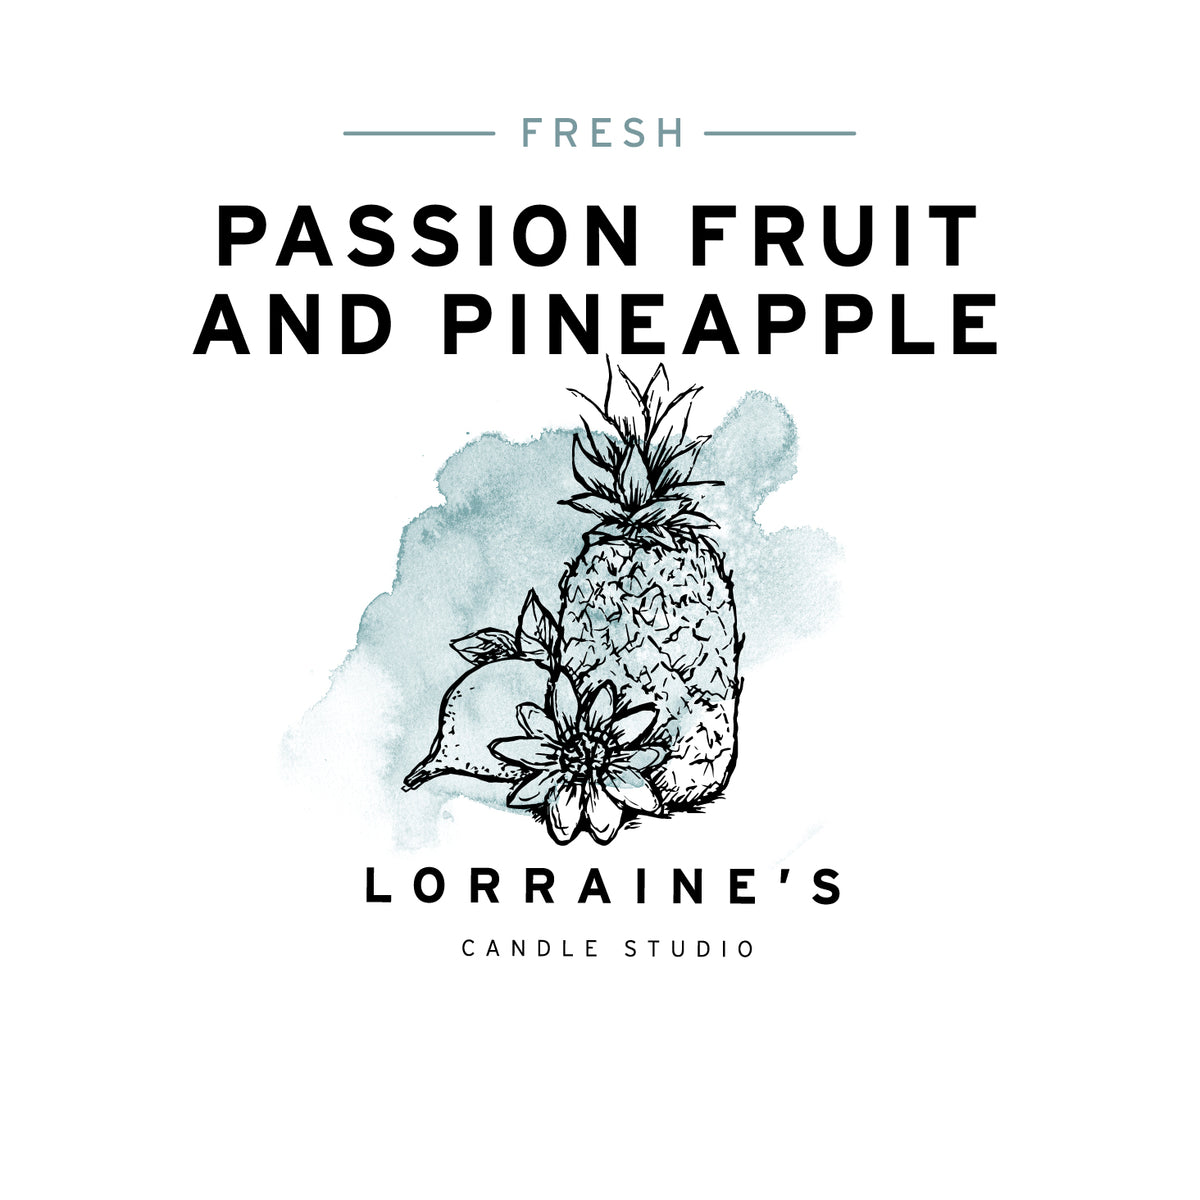 Passion Fruit and Pineapple